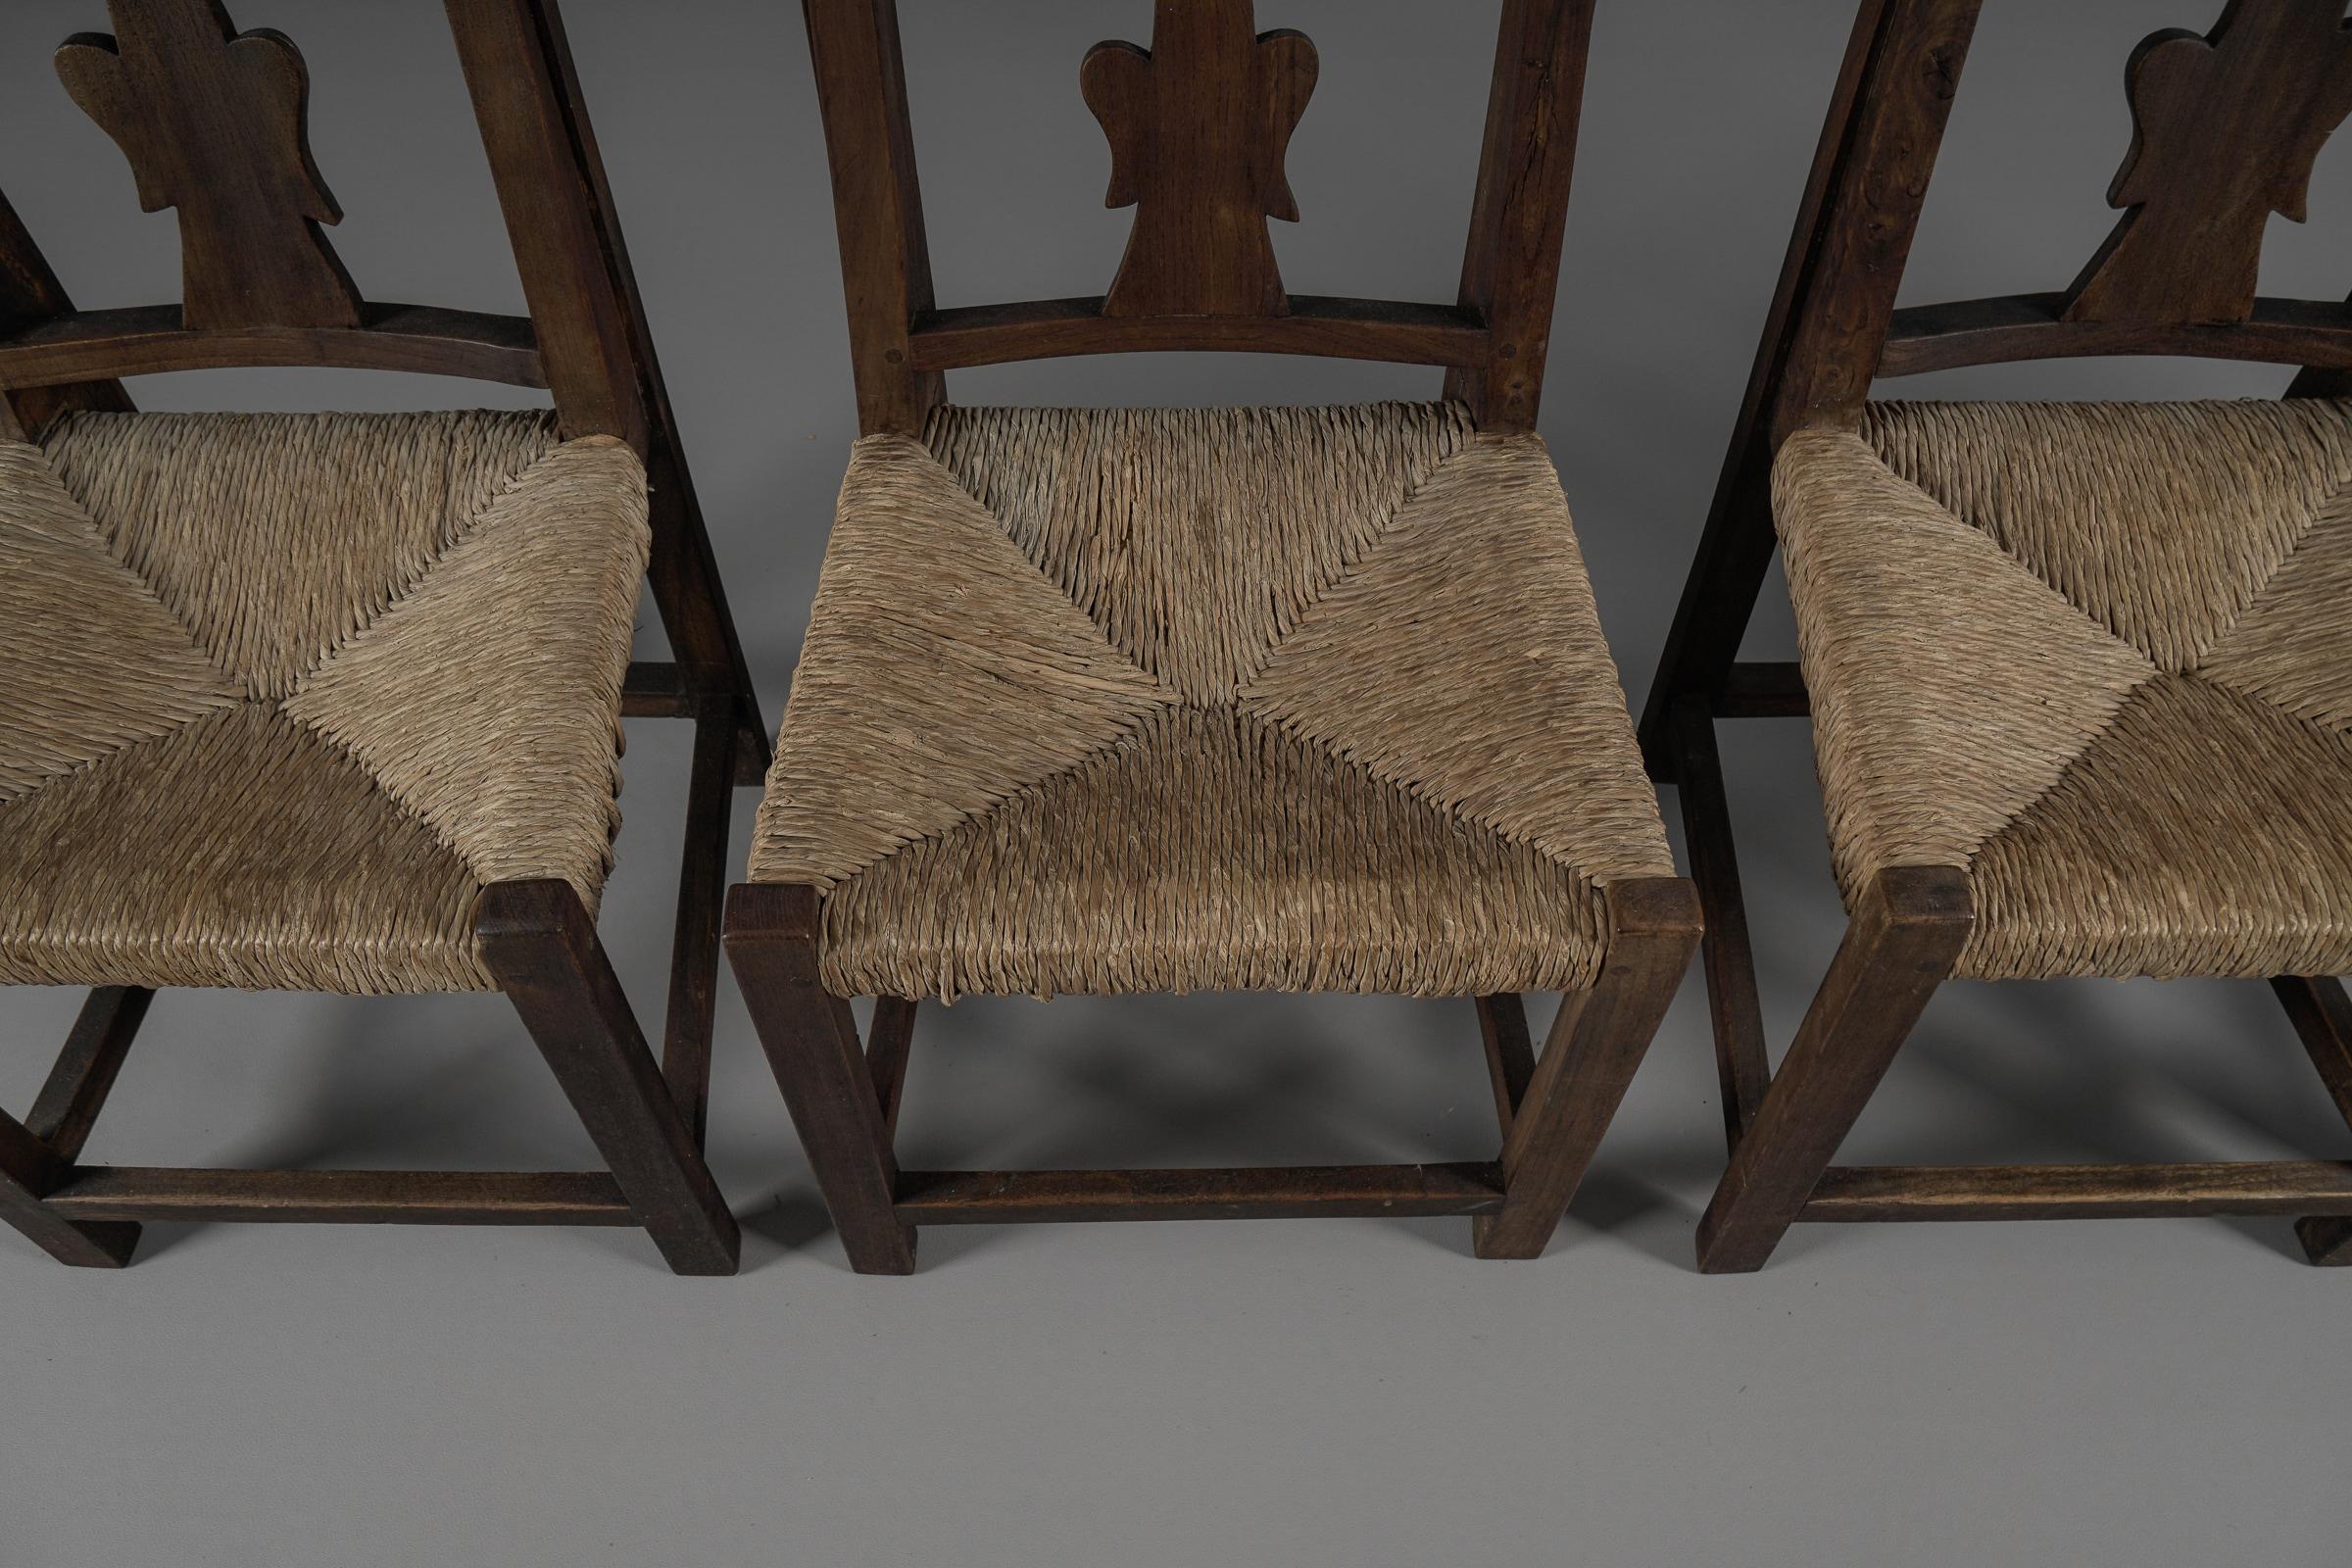 Set of 4 French Provincial Wood & Seagrass Chairs, 1960s Mid-Century Modern For Sale 10